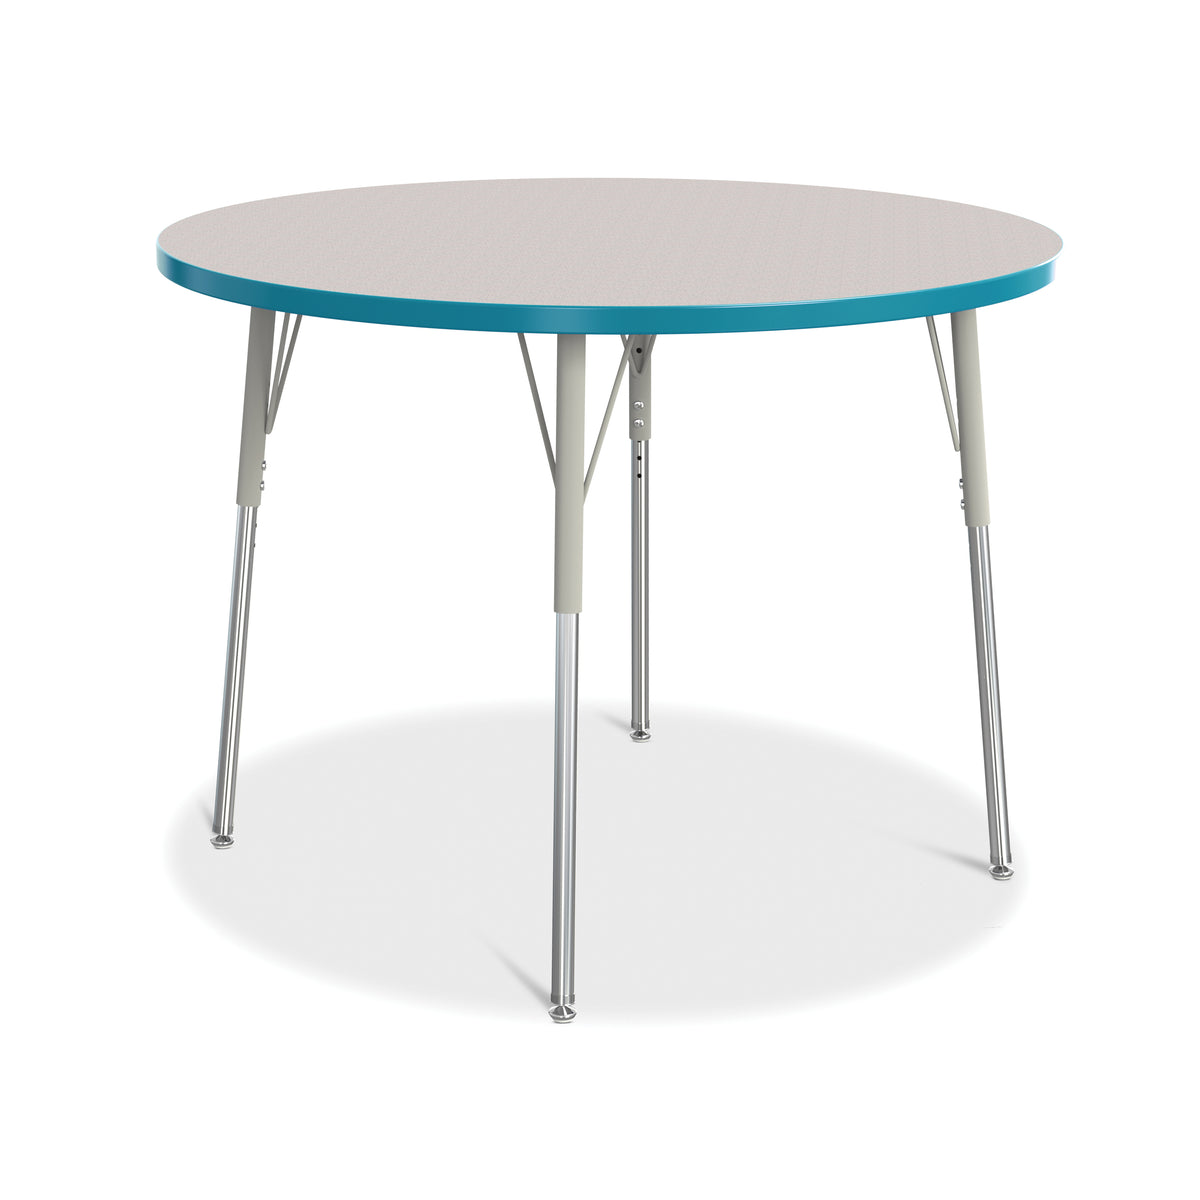 6468JCA005, Berries Round Activity Table - 42" Diameter, A-height - Freckled Gray/Teal/Gray